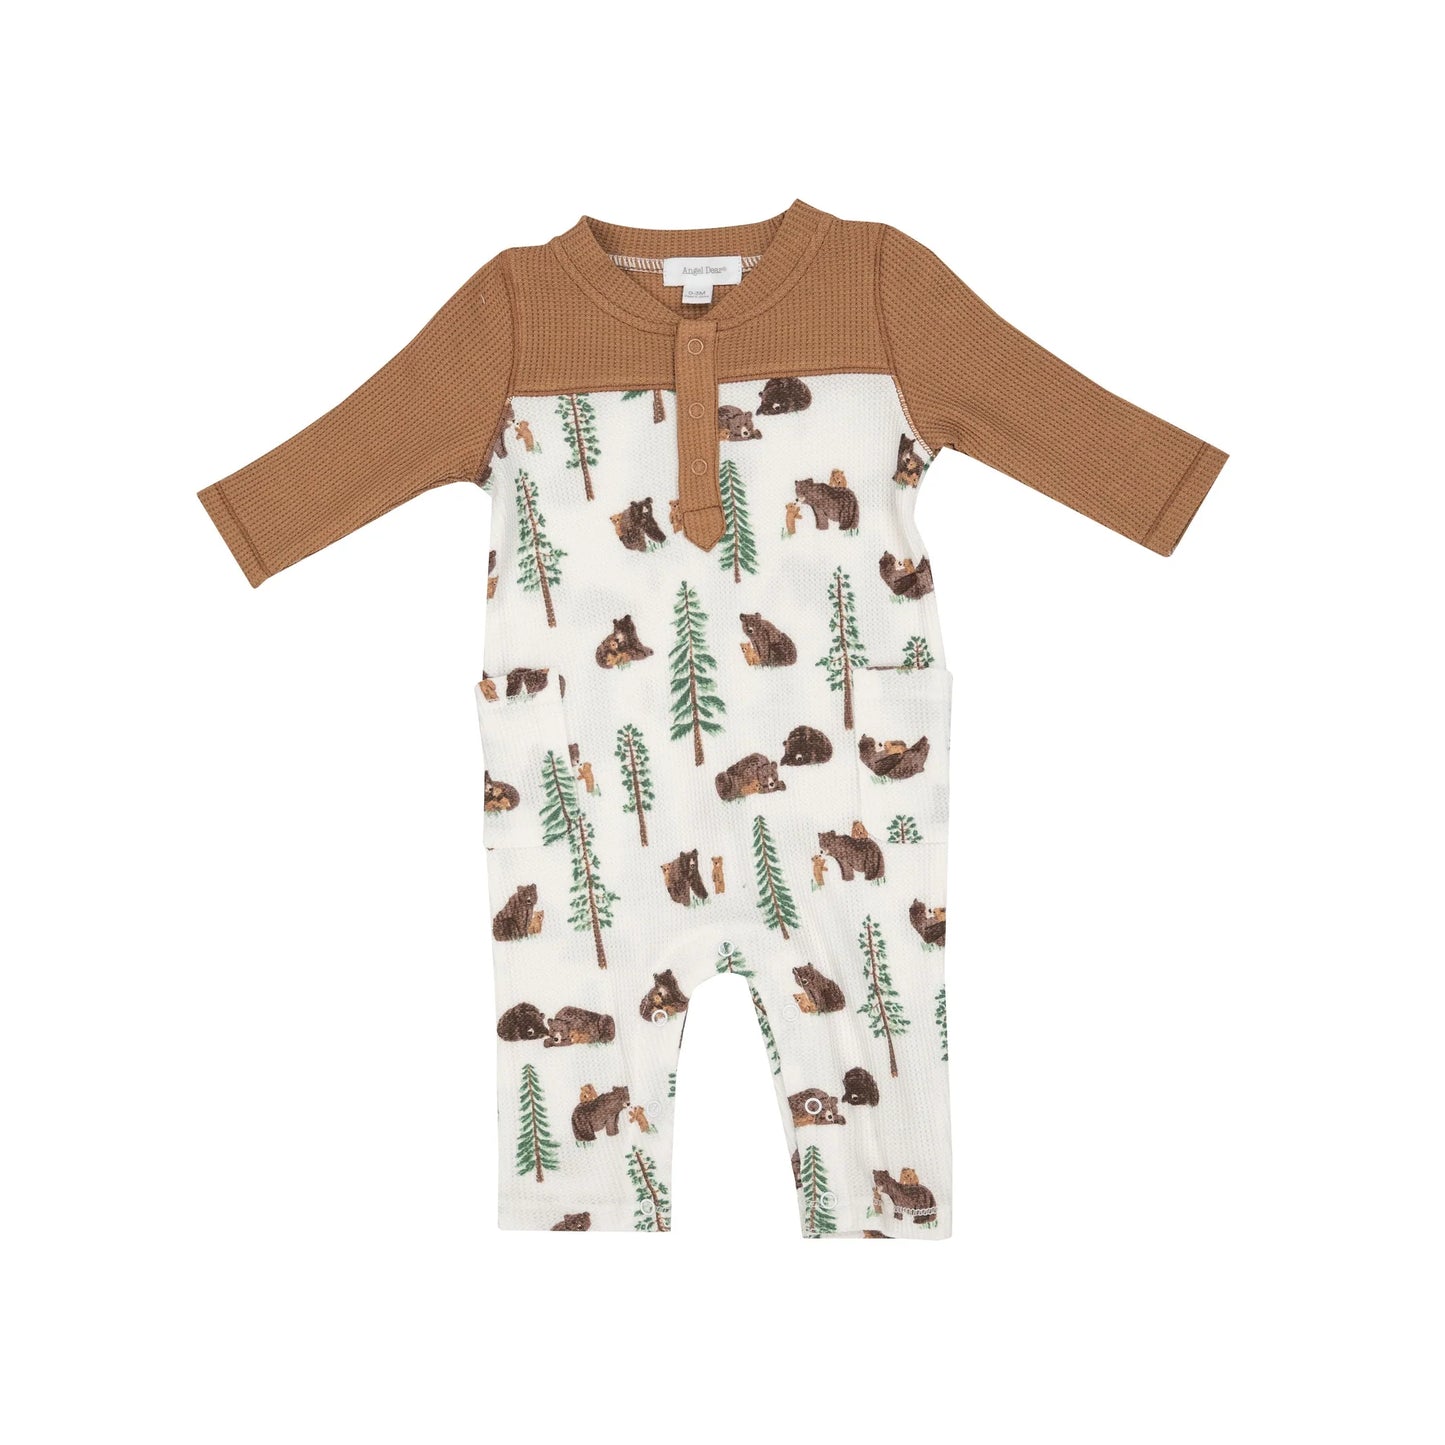 Last One - Size 12/18M: Romper (Snaps) - Brown Bear With Contrast Color Sleeves